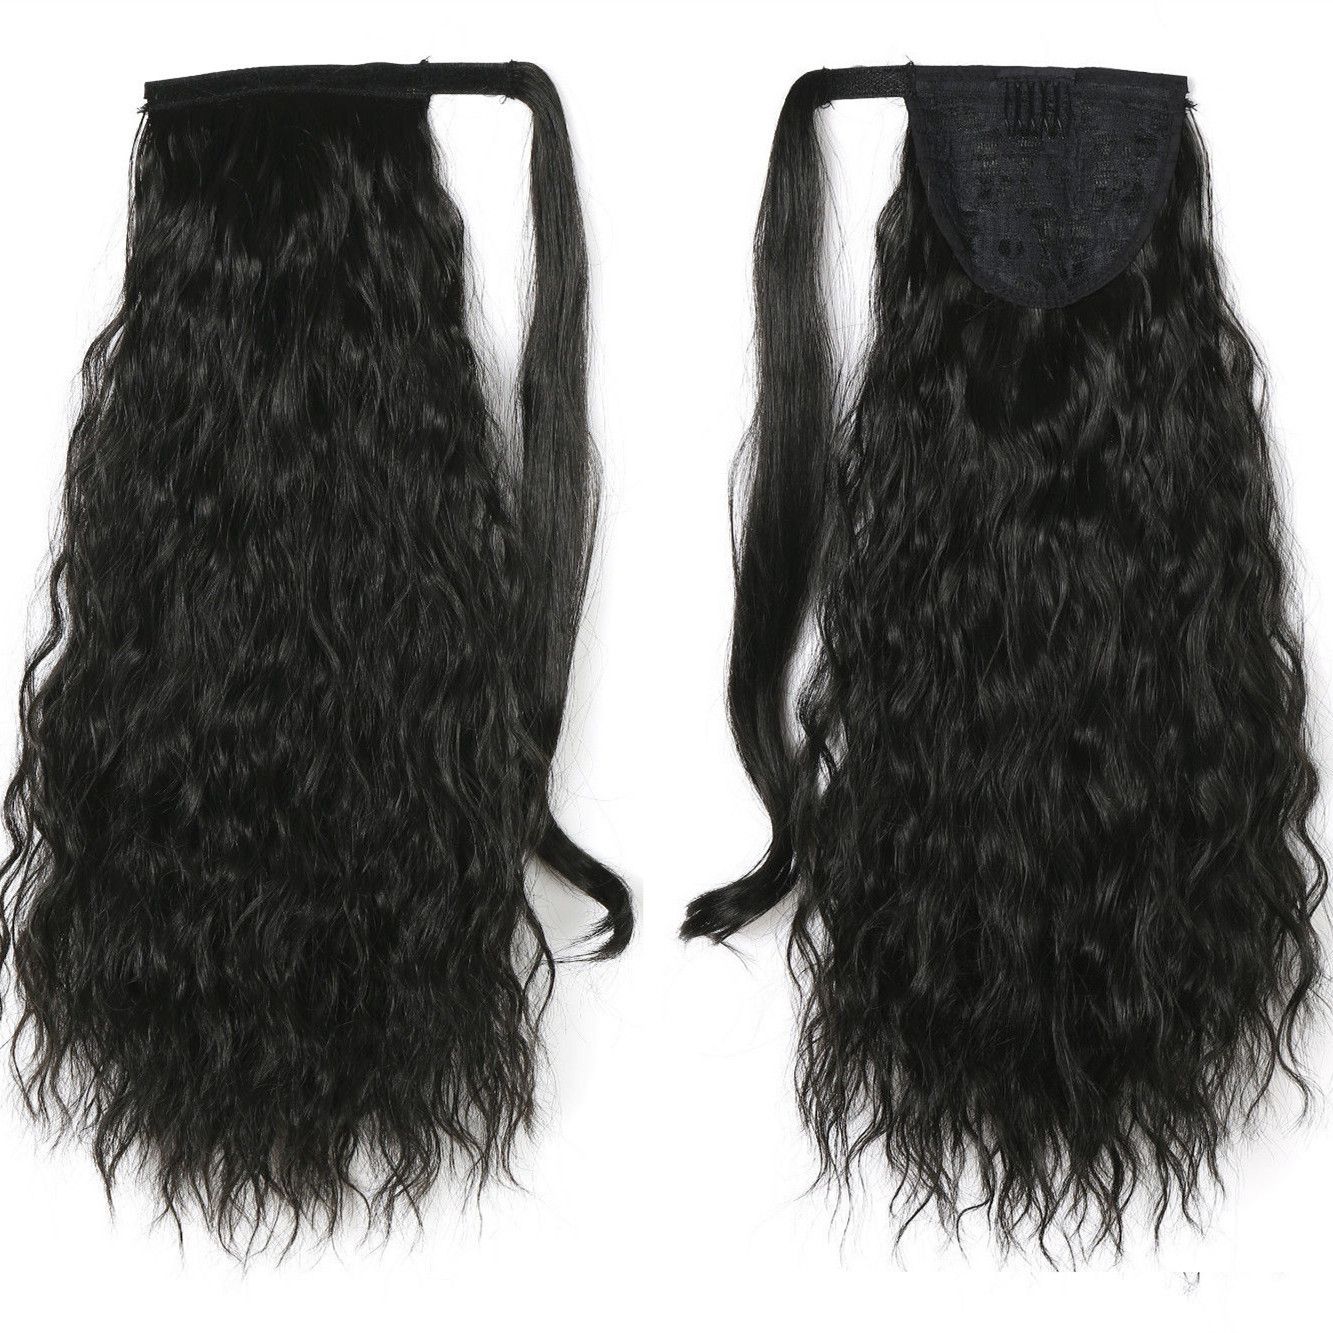 Corn Curly Hair Strap On Type Ponytail Braided Hiphop Coil Corn Medium Hair Receiving Human Hair Can Be Ironed Or Dyed 120g Real Hair Hairpieces